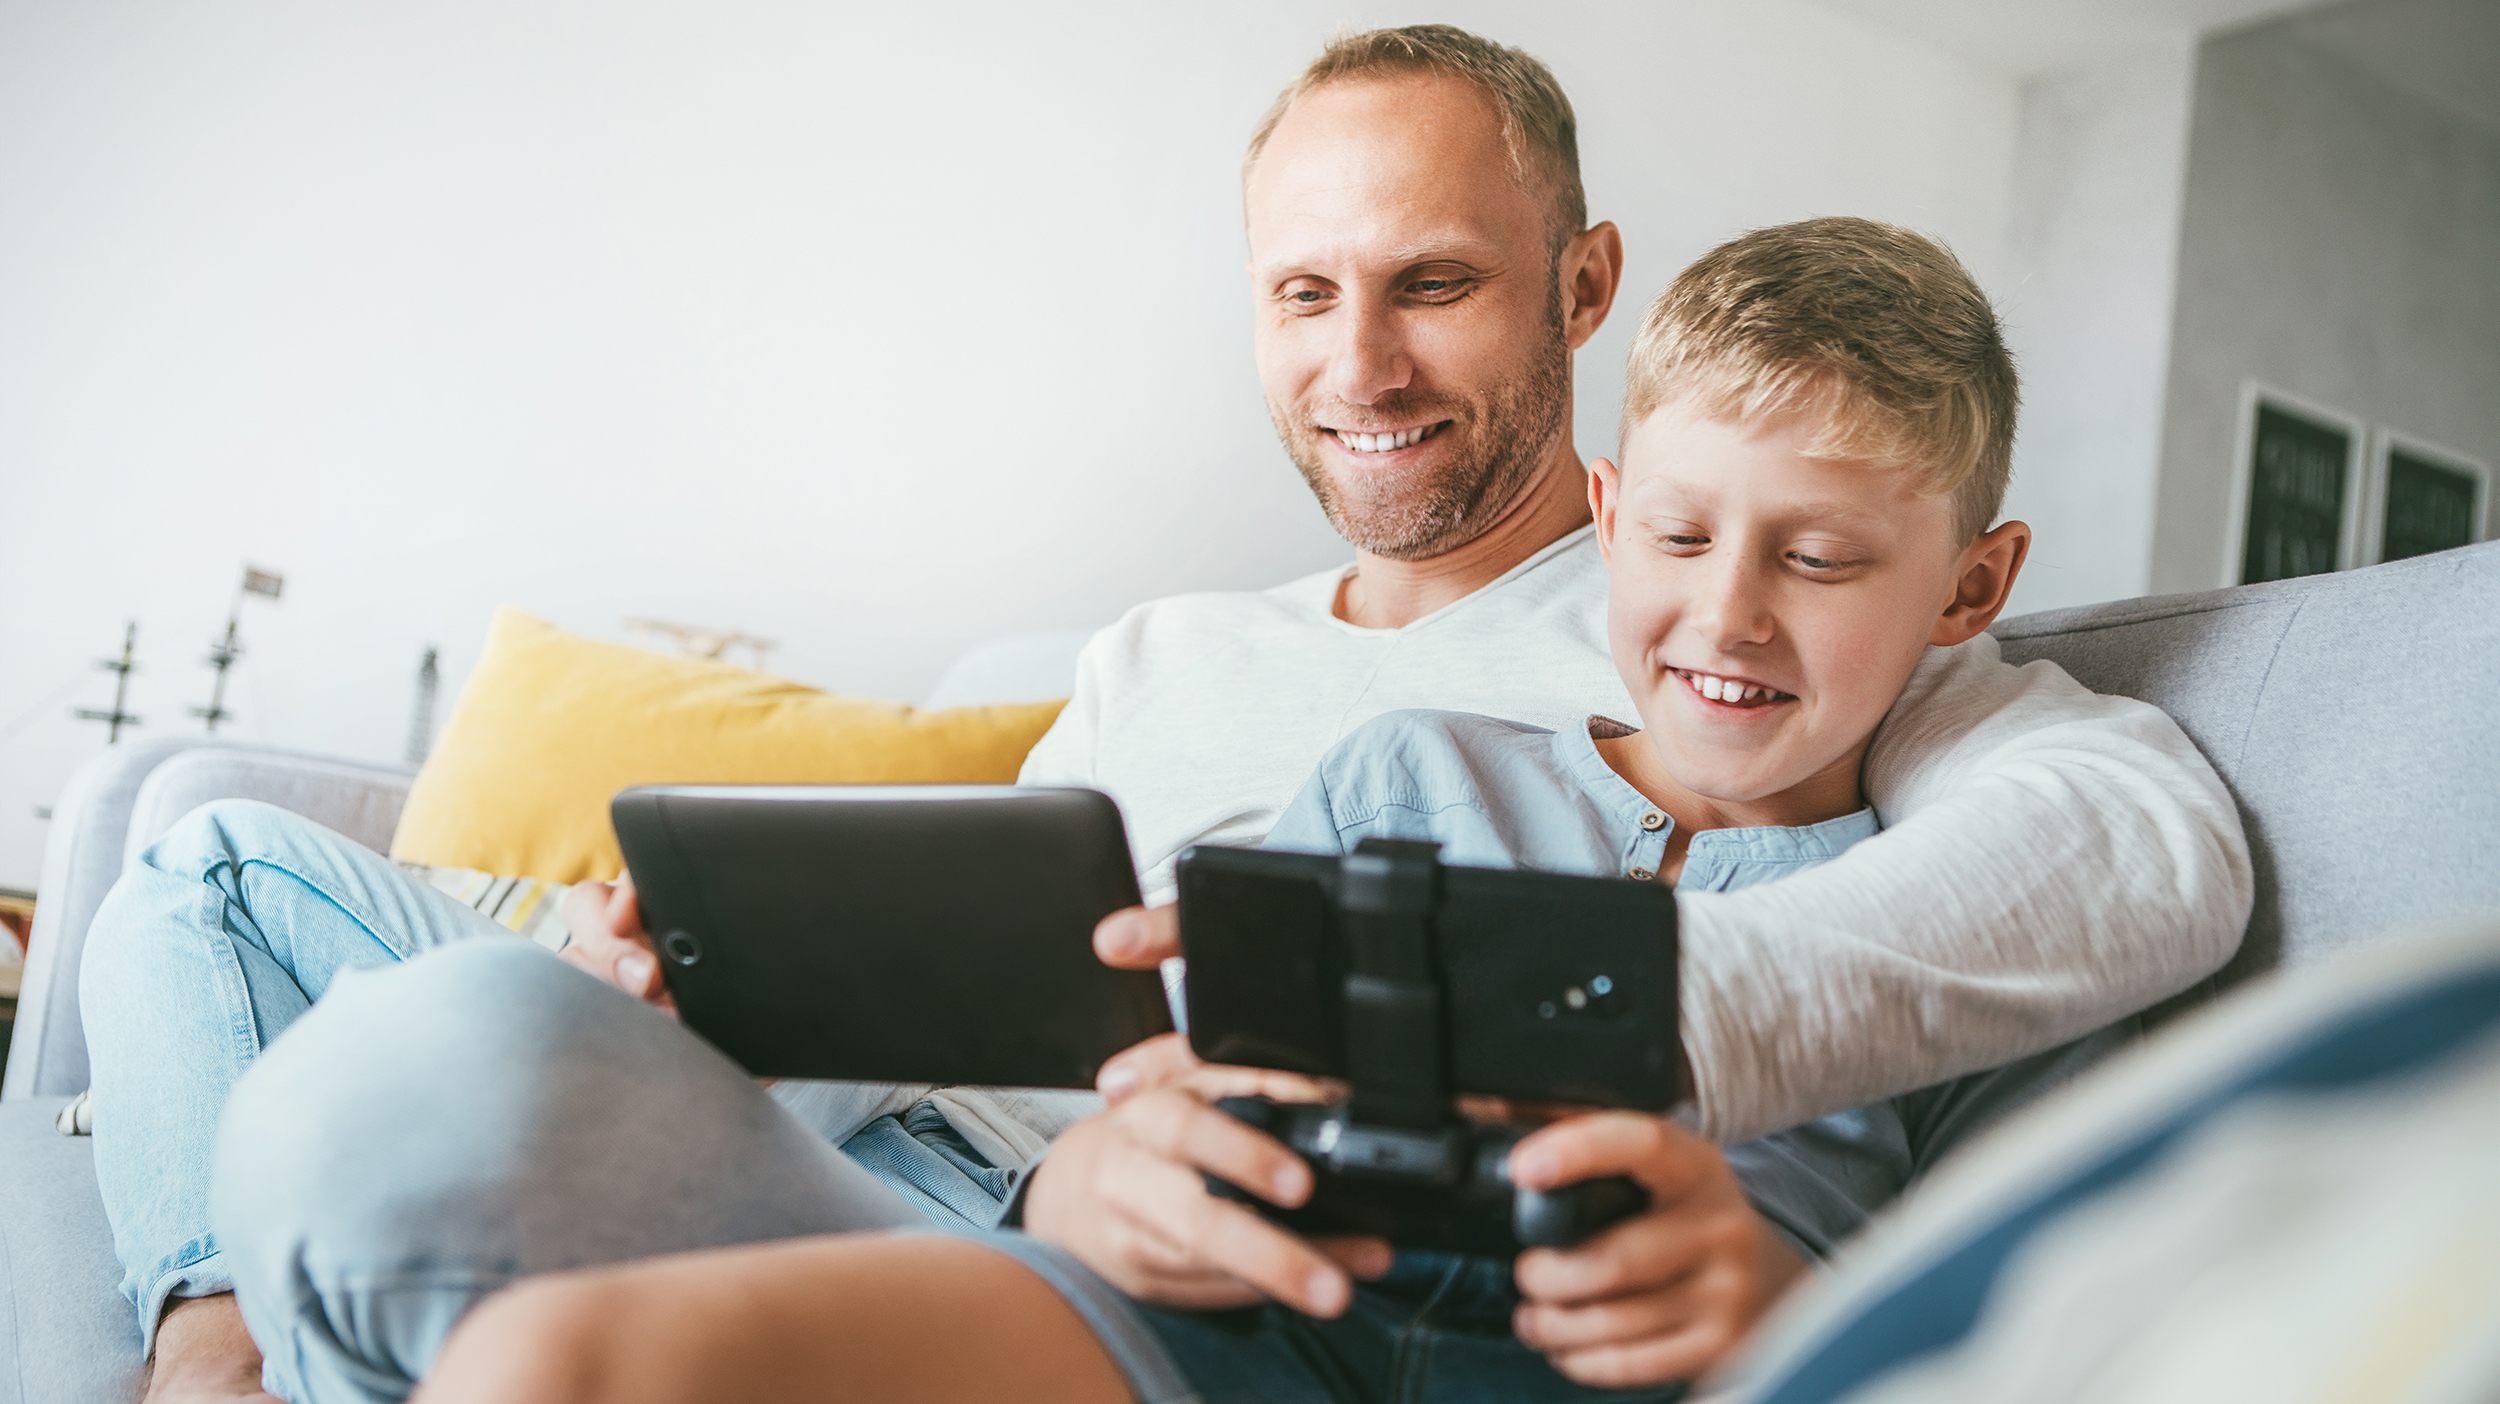 gadgets for father's day